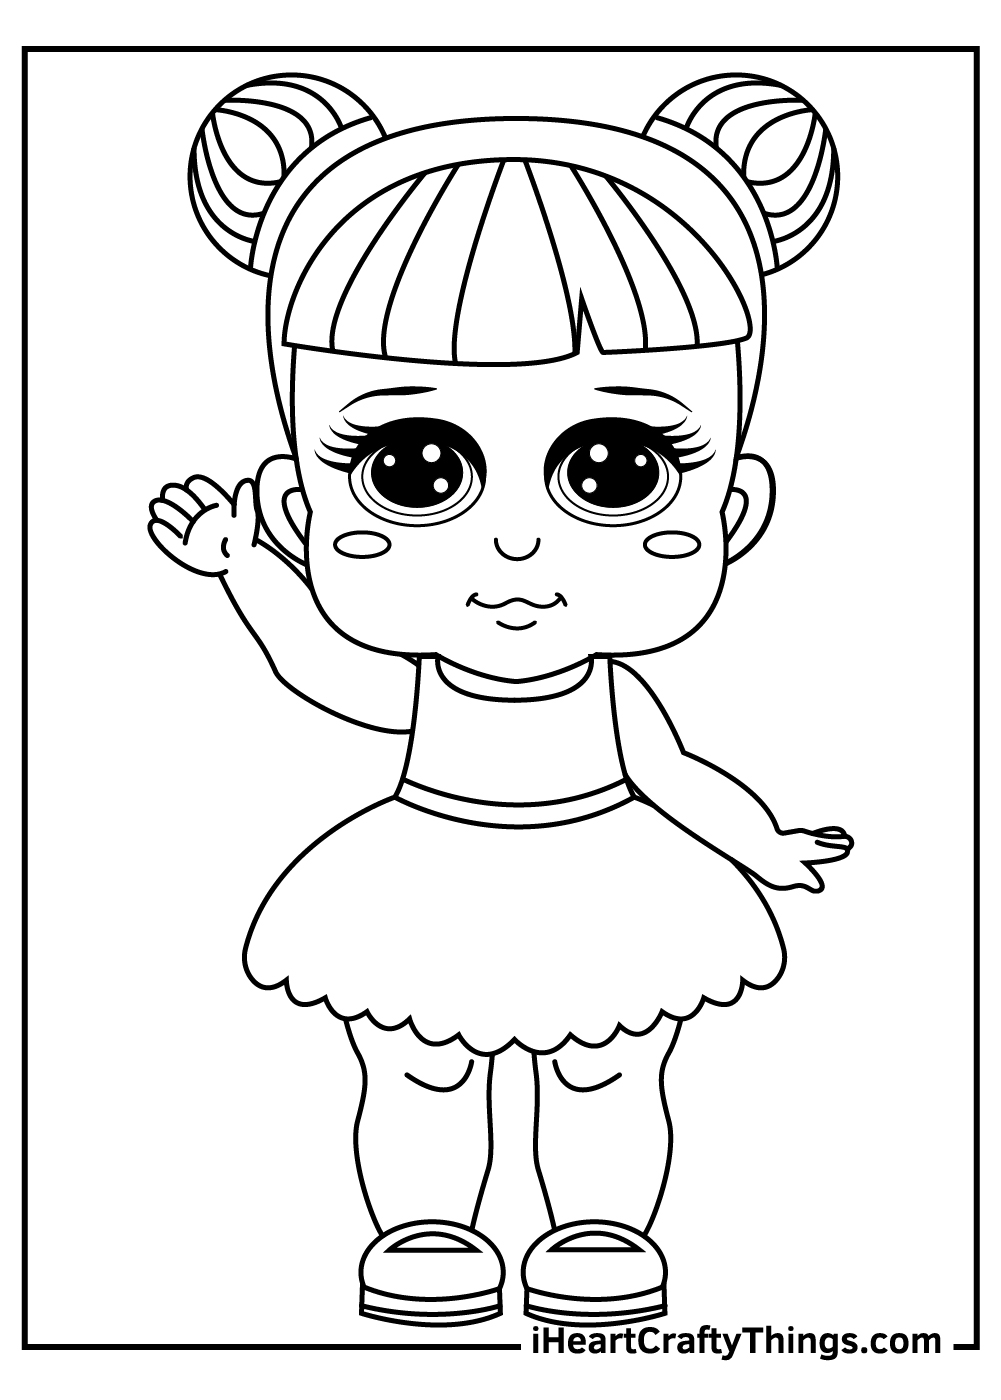 Dolls coloring pages free printables